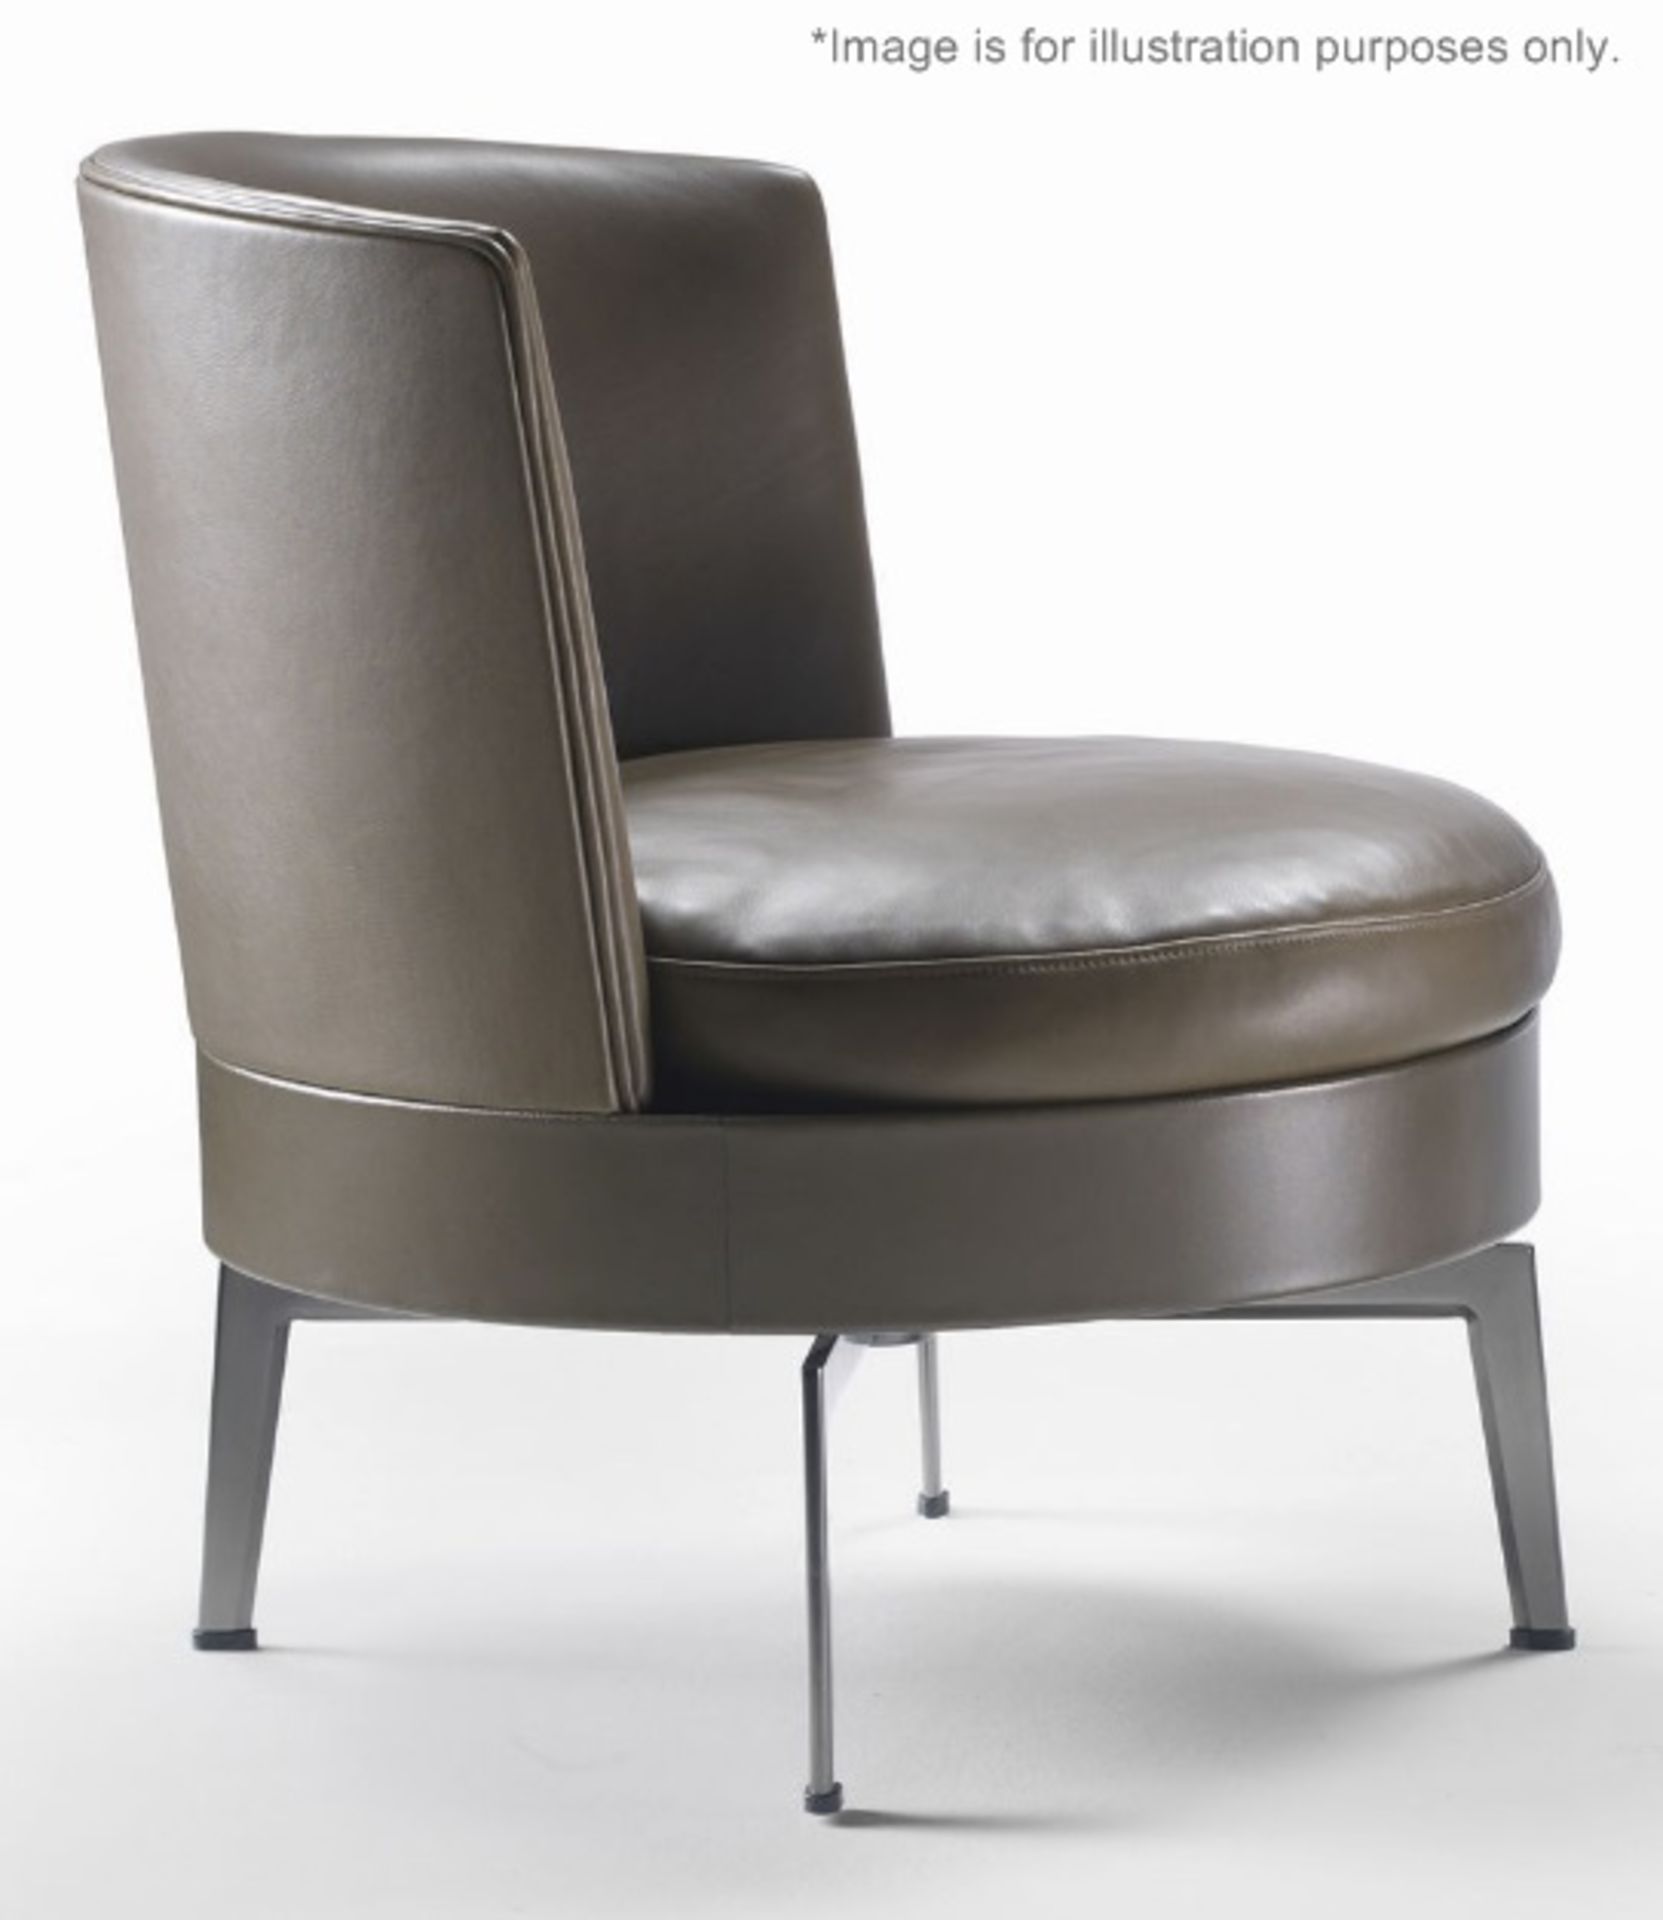 1 x Flexform "FEELGOOD" Soft Armchair - Features Fabric / Leather Upholstery, and Swivel Base - Ref: - Image 10 of 10